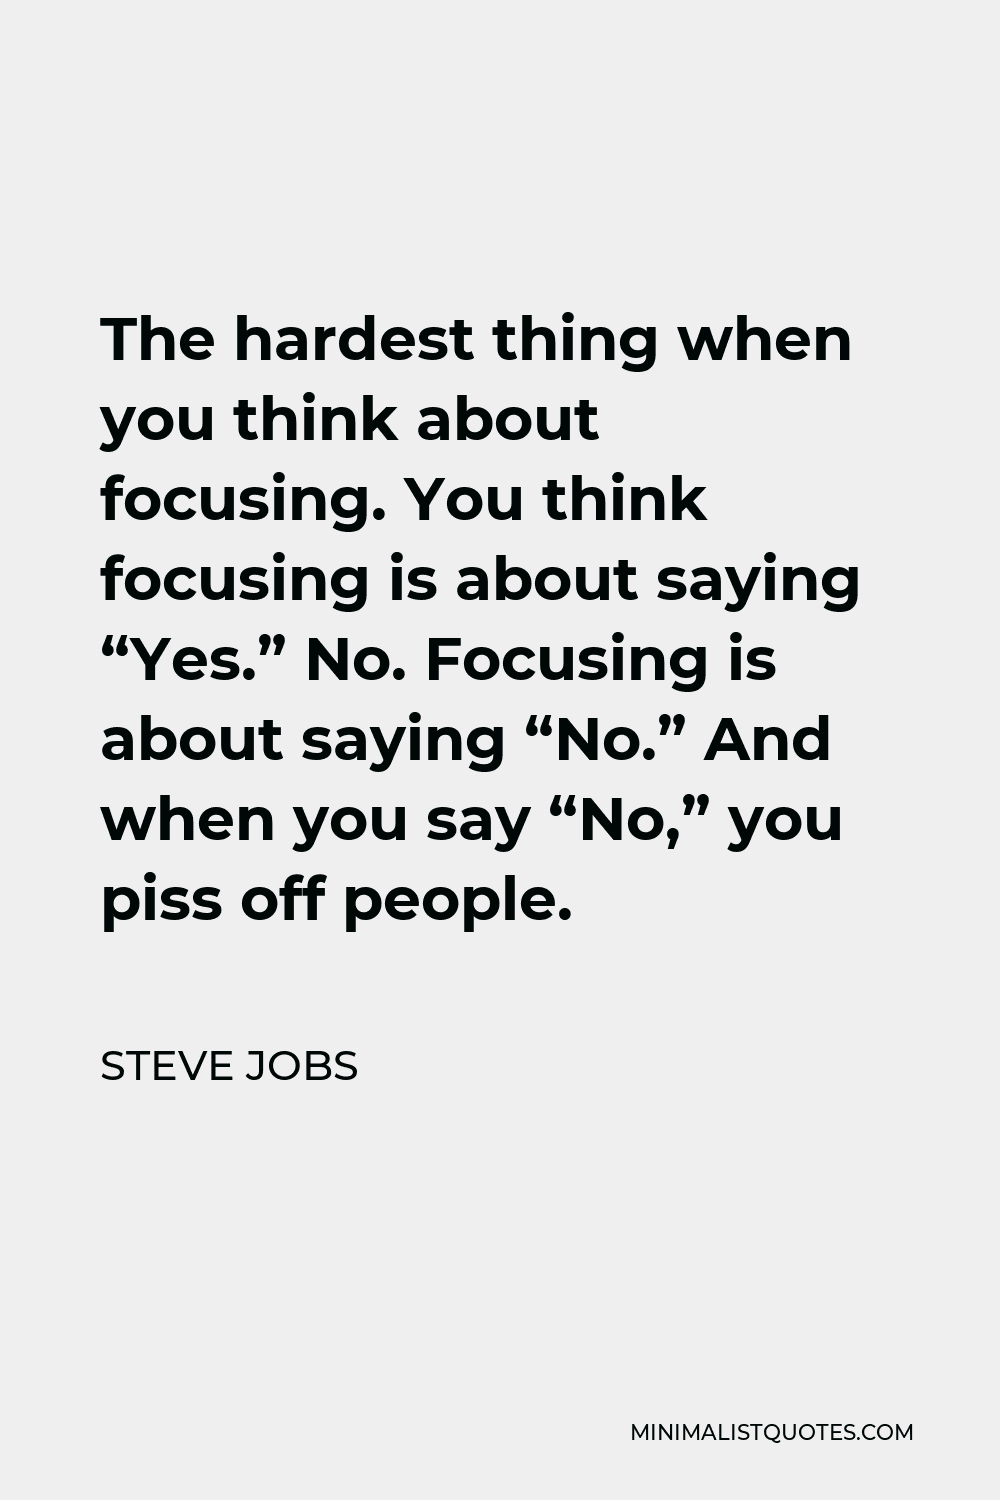 Steve Jobs Quote - The hardest thing when you think about focusing. You think focusing is about saying “Yes.” No. Focusing is about saying “No.” And when you say “No,” you piss off people.